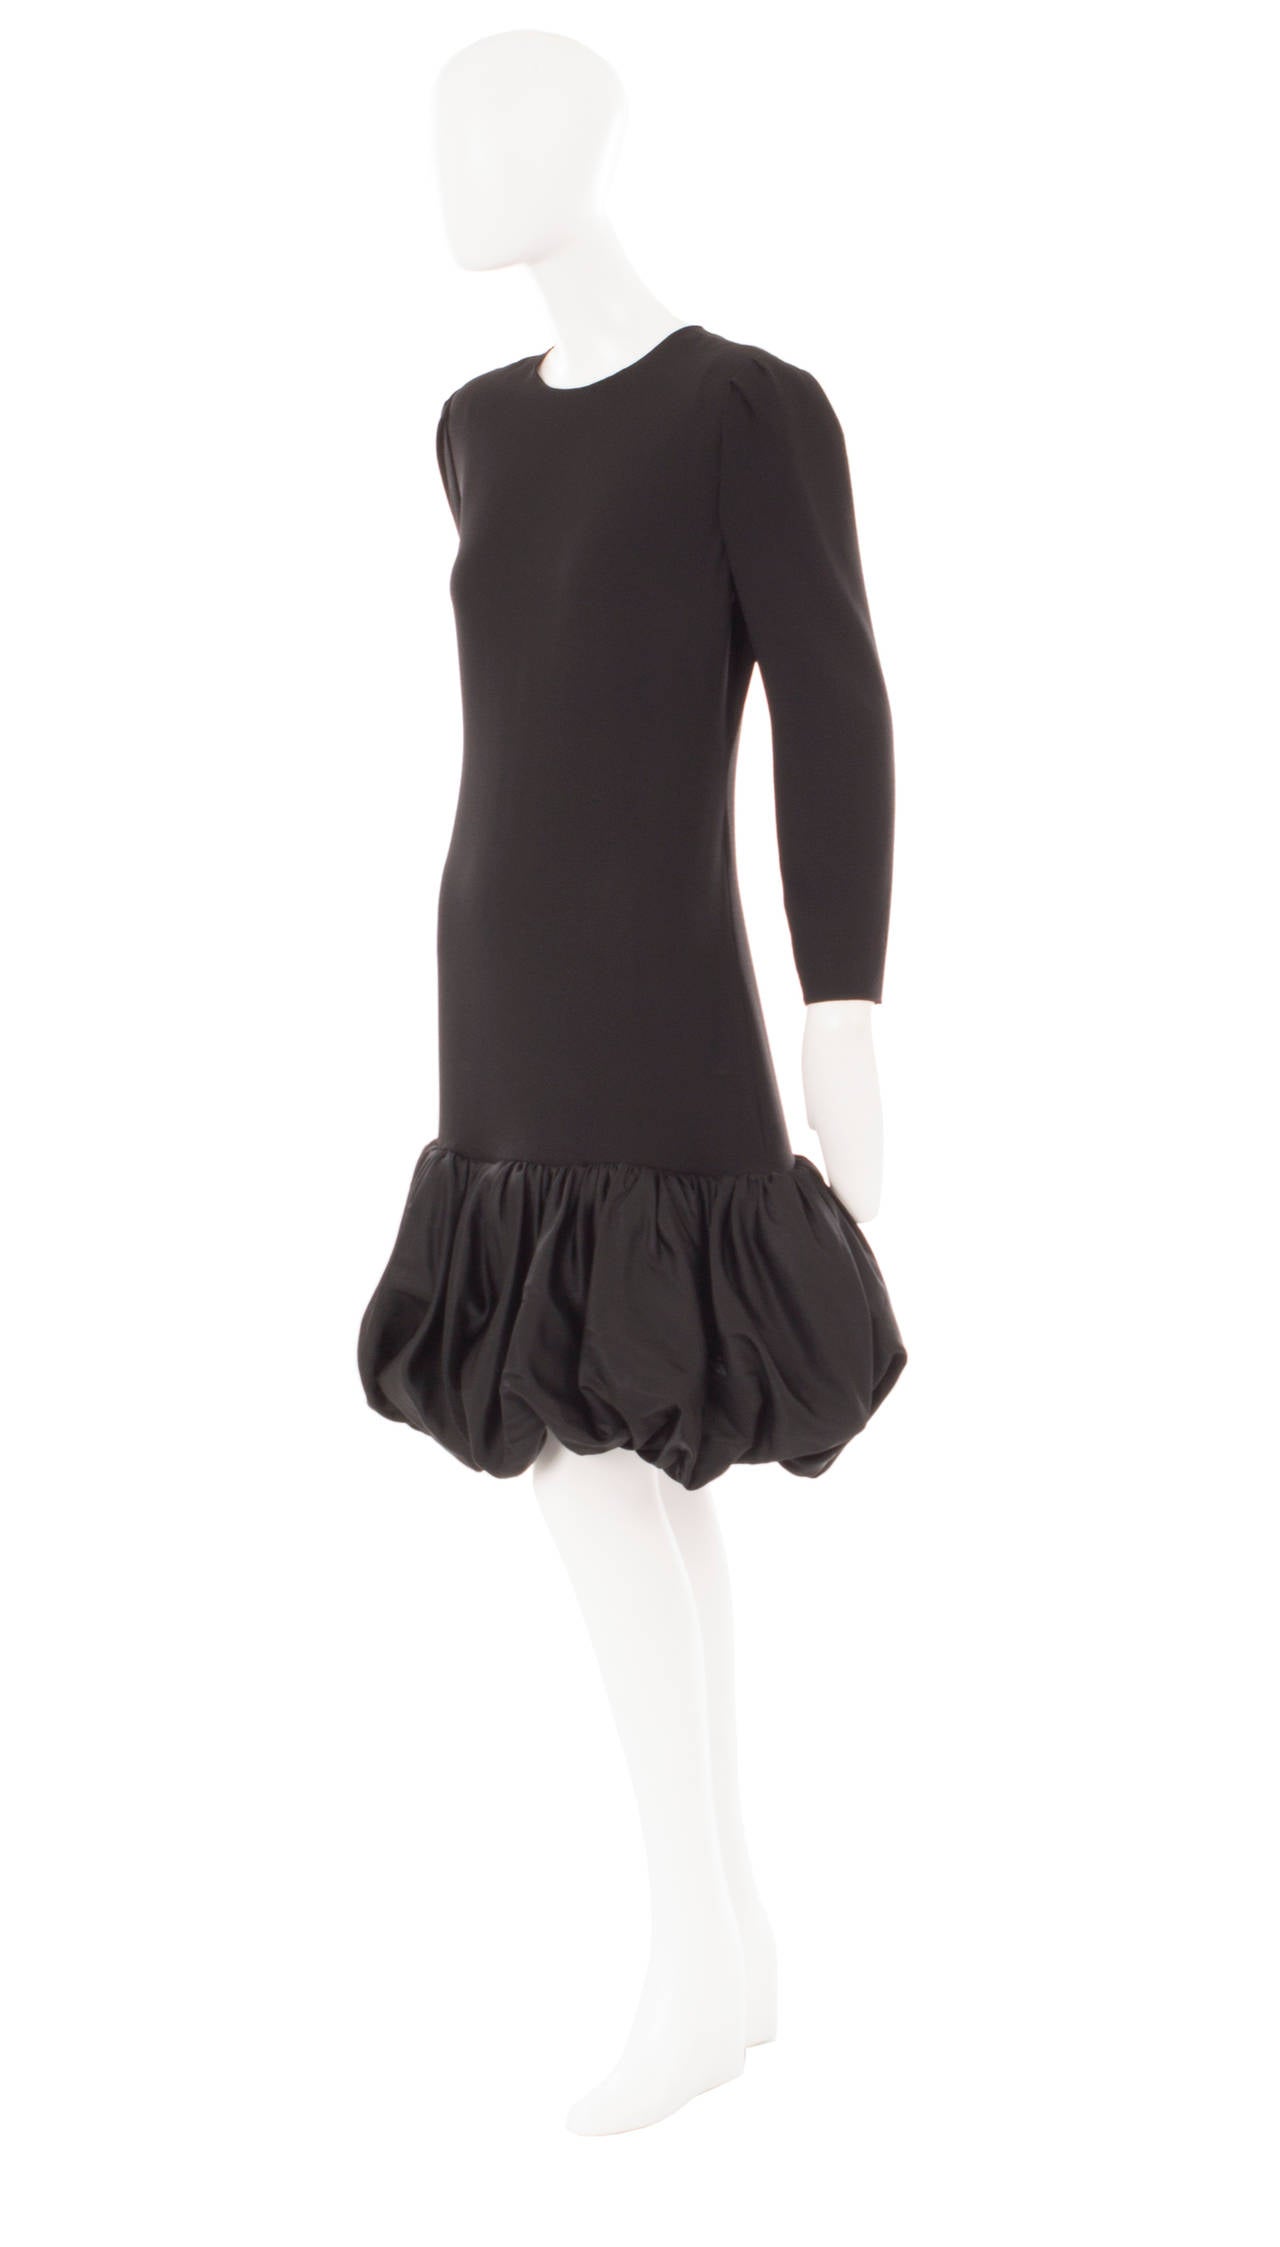 This Bill Blass black cocktail dress is perfect for parties! Constructed in wool crepe, the loose cut and long sleeves give a relaxed feel while the satin puffball hem adds drama.  Just add a pair of heels and a clutch bag to finish the look!

The